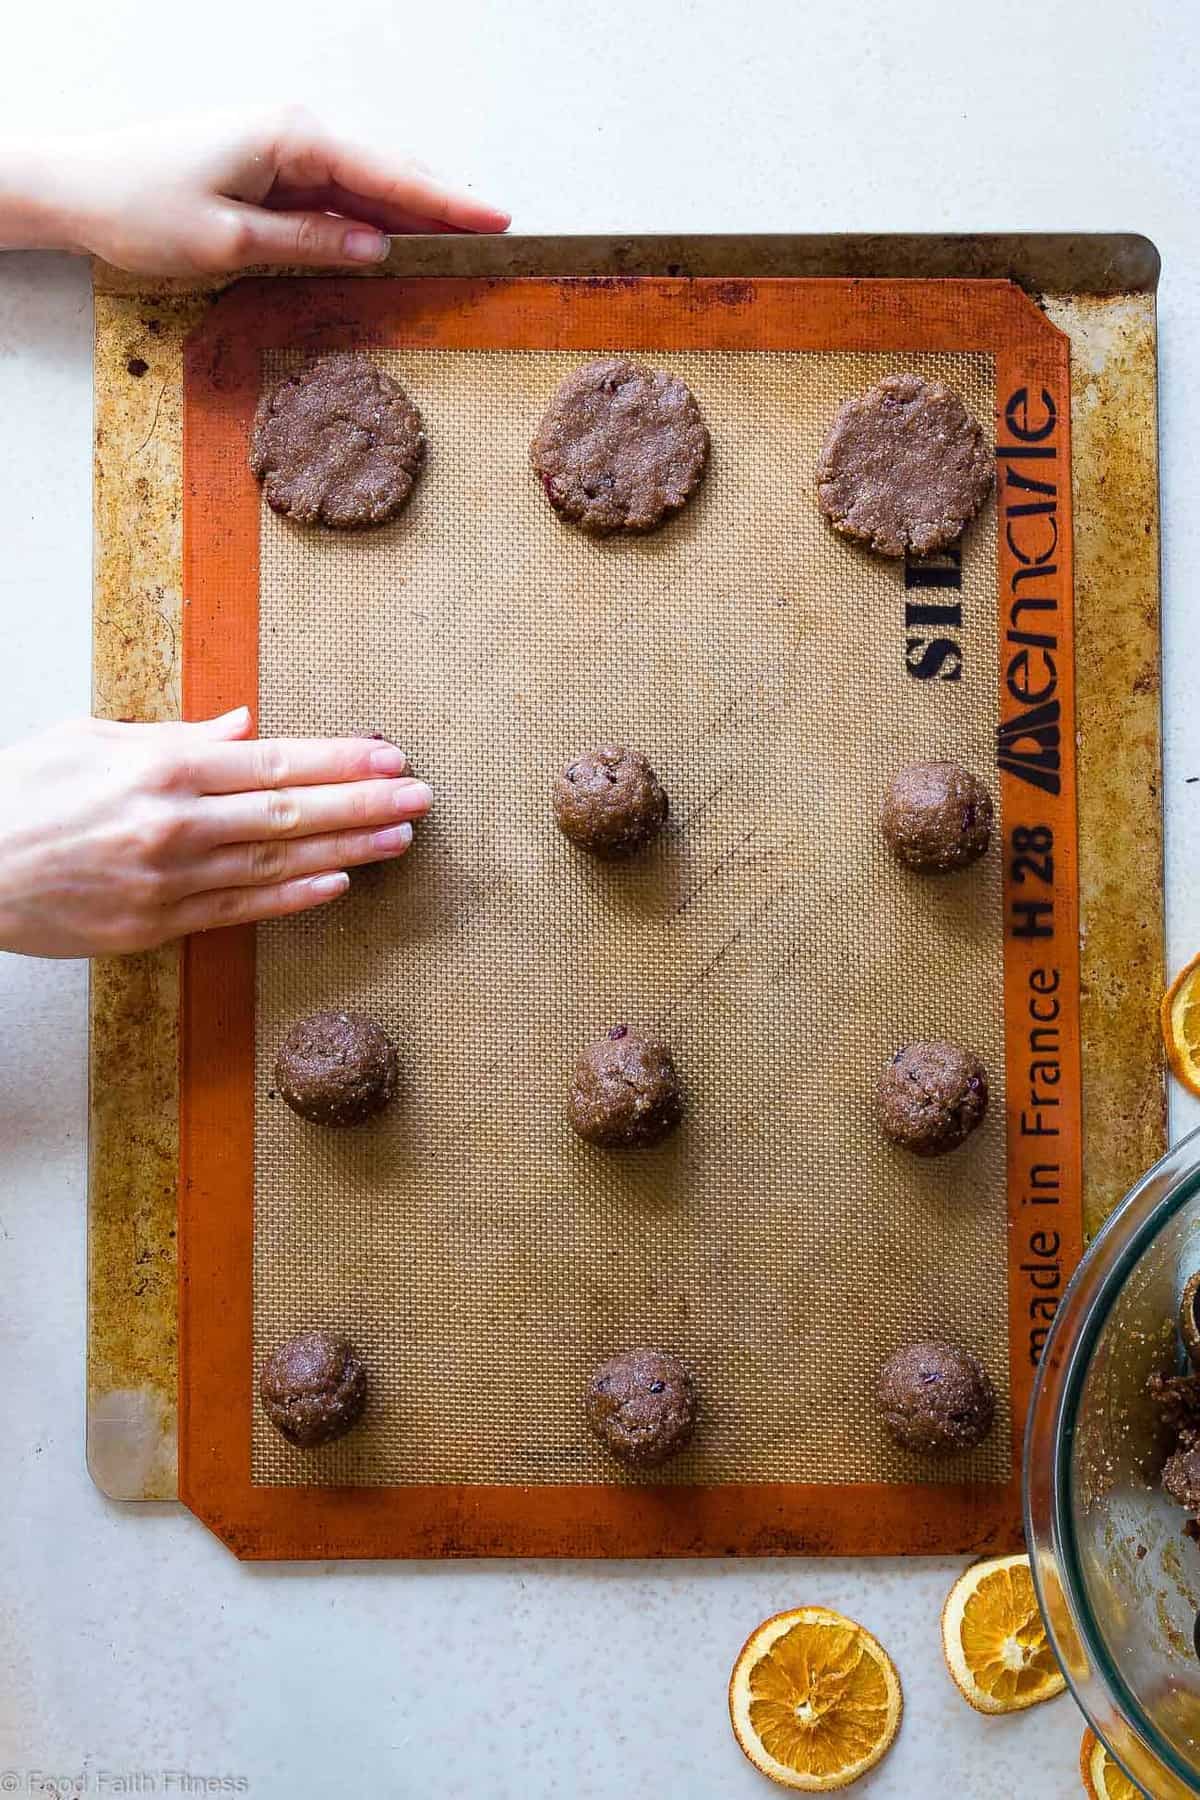 Orange Cardamom Paleo Almond Butter Cookies - SO crispy on the outside, chewy on the inside and loaded with festive flavor! You will never believe these are healthy, vegan and gluten free too! | #Foodfaithfitness | 